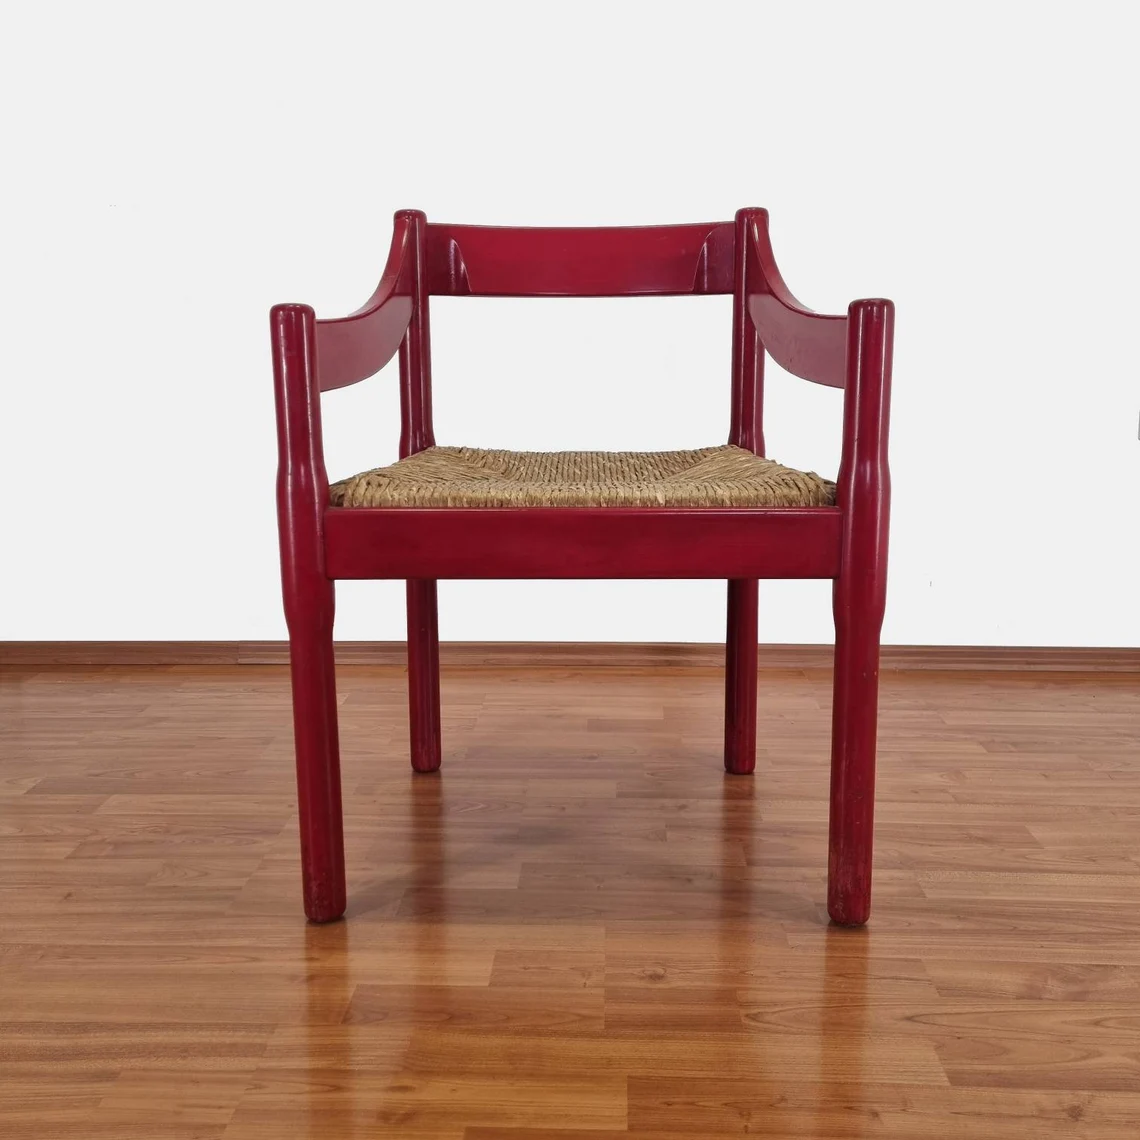 Vintage CARIMATE Chair by Vico Magistretti, Mid Century Wood and Rope Dining Chair, Italy 60s